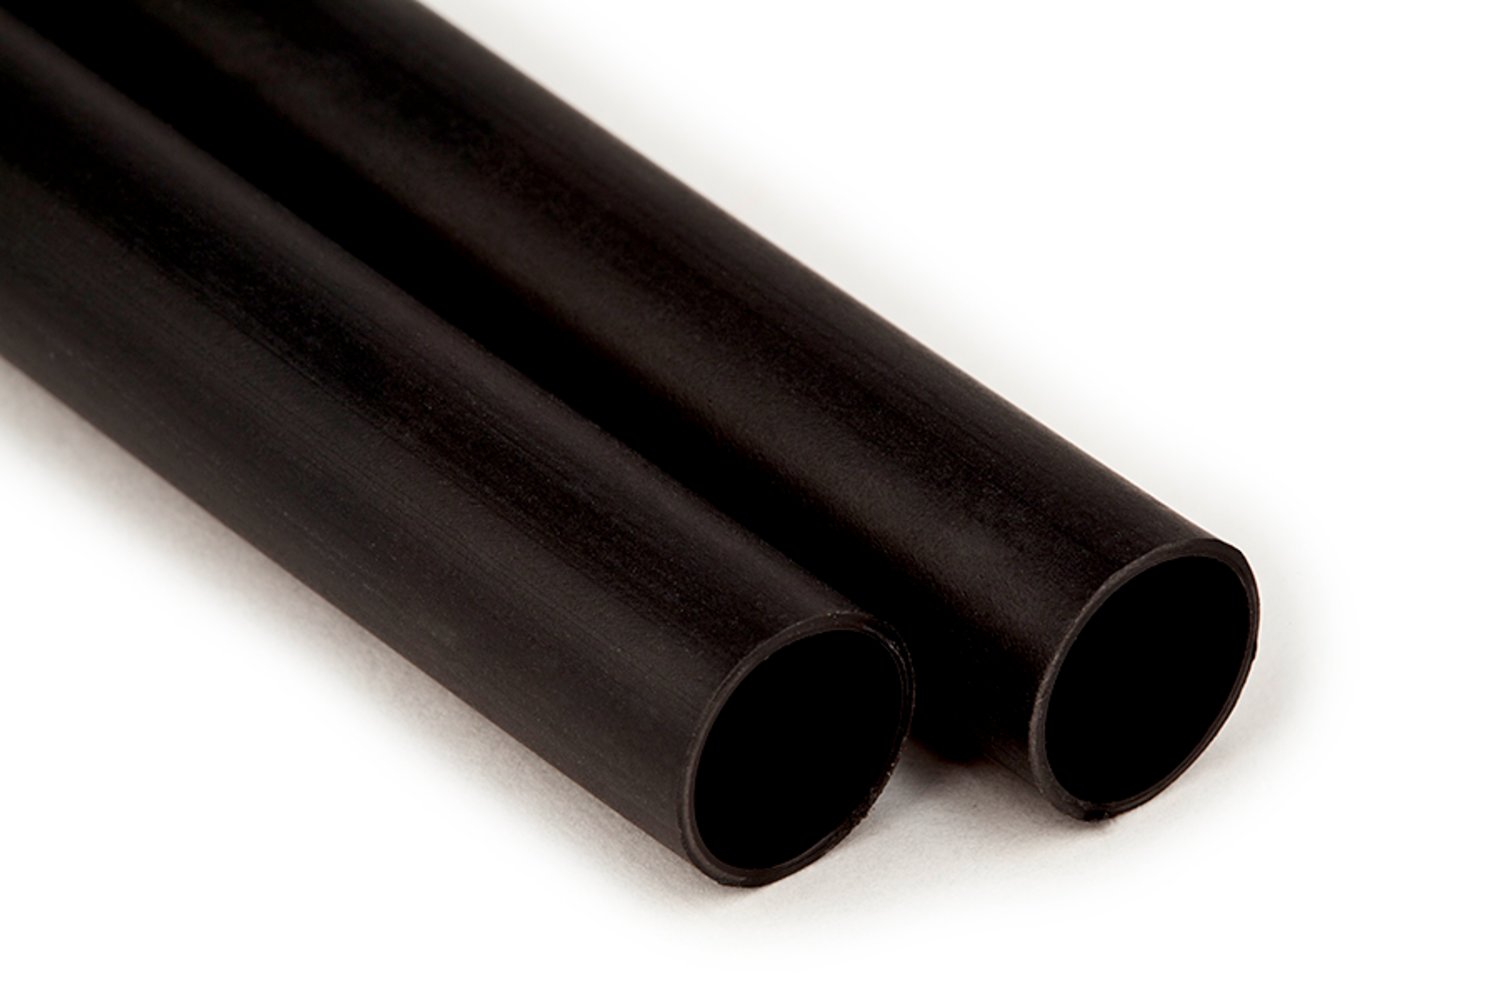 7000133622 - 3M Heat Shrink Multiple-Wall Polyolefin Tubing
EPS400-.350-48"-Black-125 Pcs, 48 in length sticks, 125 pieces/case